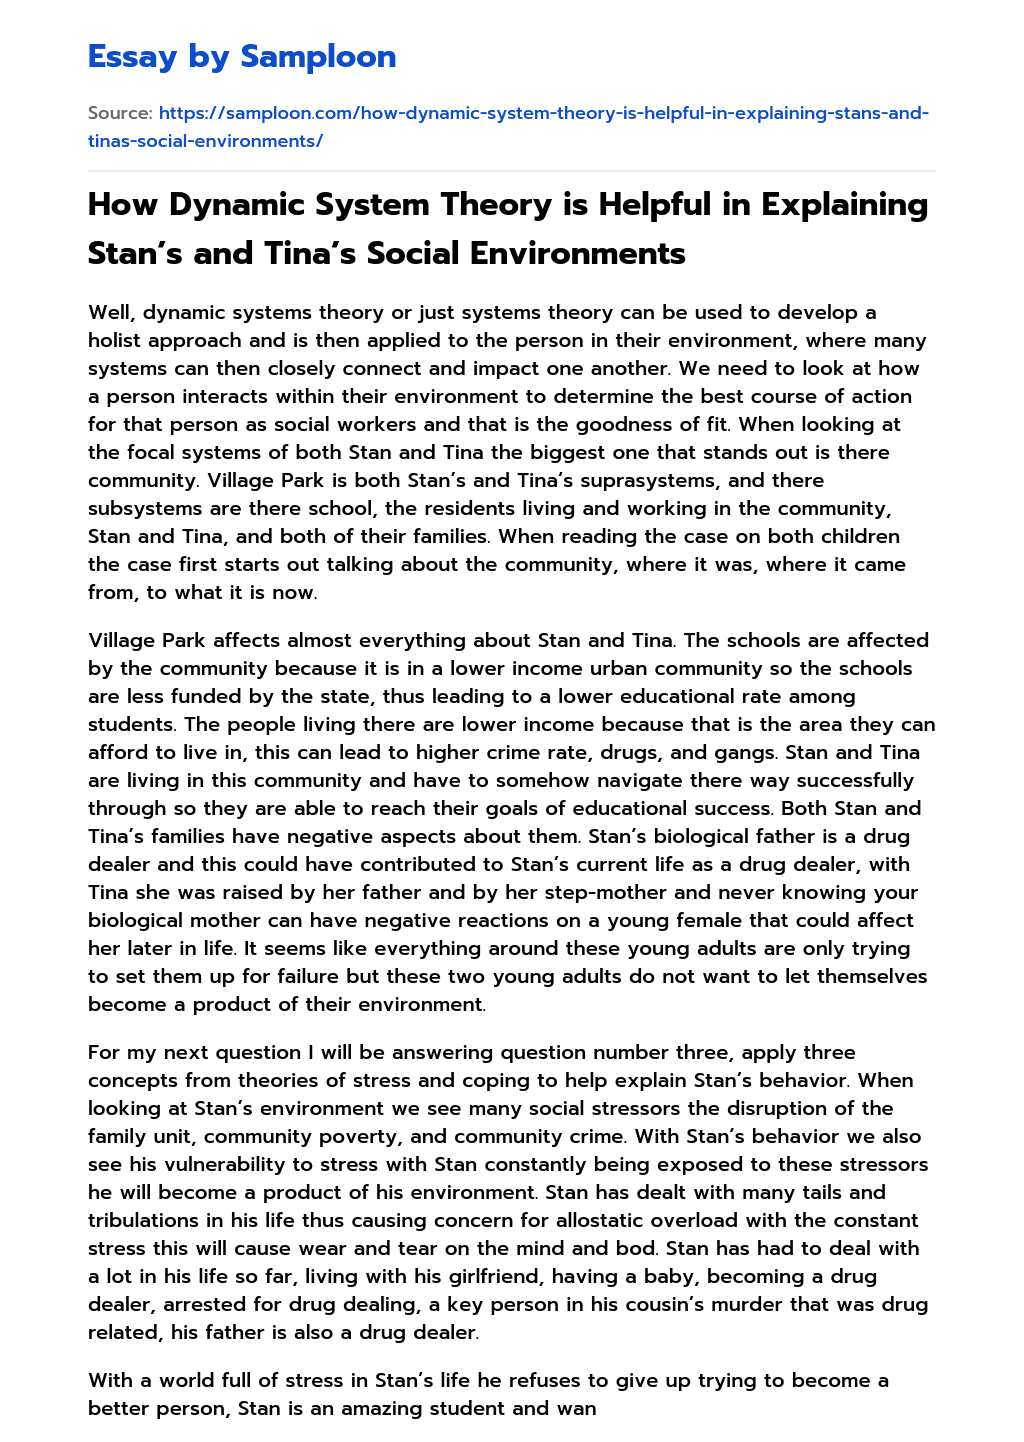 How Dynamic System Theory is Helpful in Explaining Stan’s and Tina’s Social Environments essay